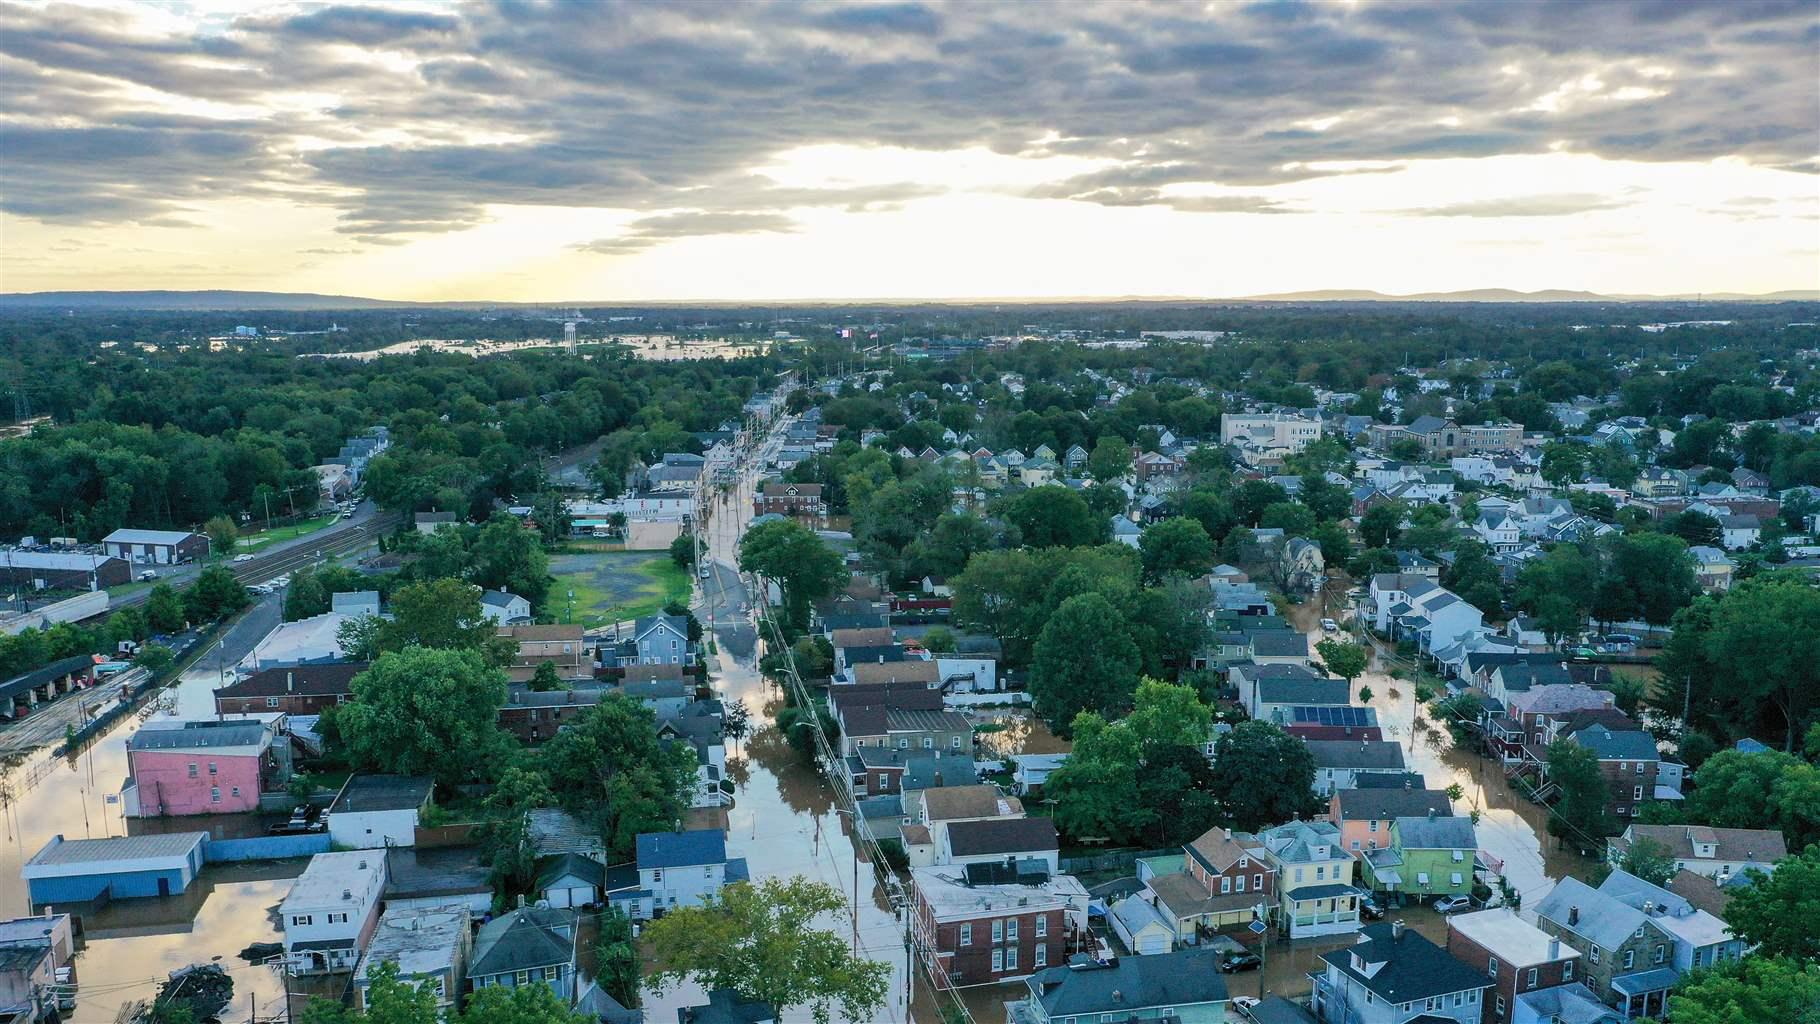 An aerial view of a community in Manville as flood water covers streets after Hurricane Ida left behind flash floods east coast, in New Jersey, United States on September 2, 2021.